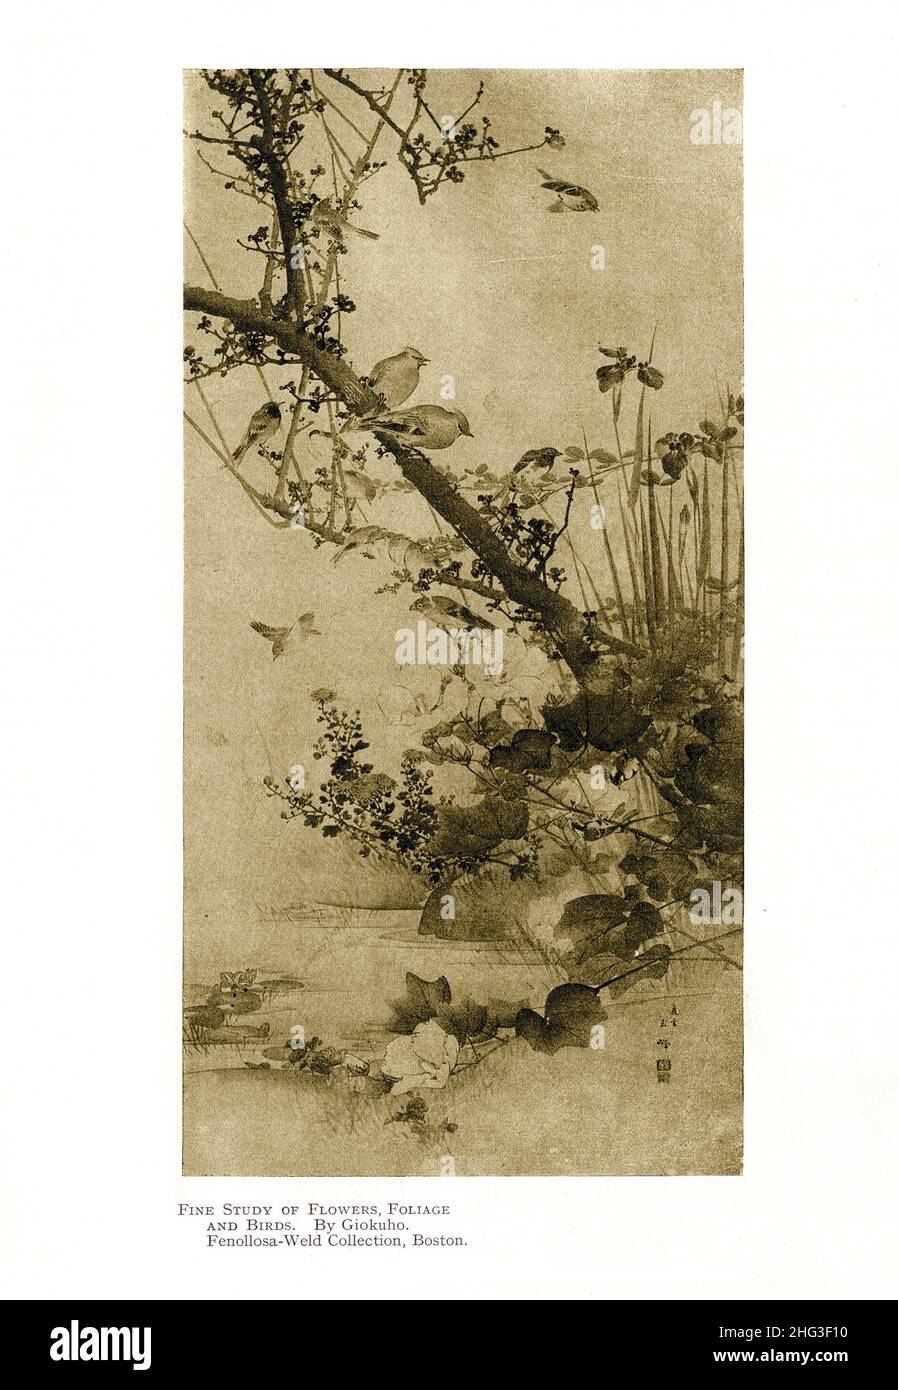 19th century Japanese painting: Fine Study of Flowers, Foliage and Birds. By Giokuho. Reproduction of book illustration of 1912 Stock Photo